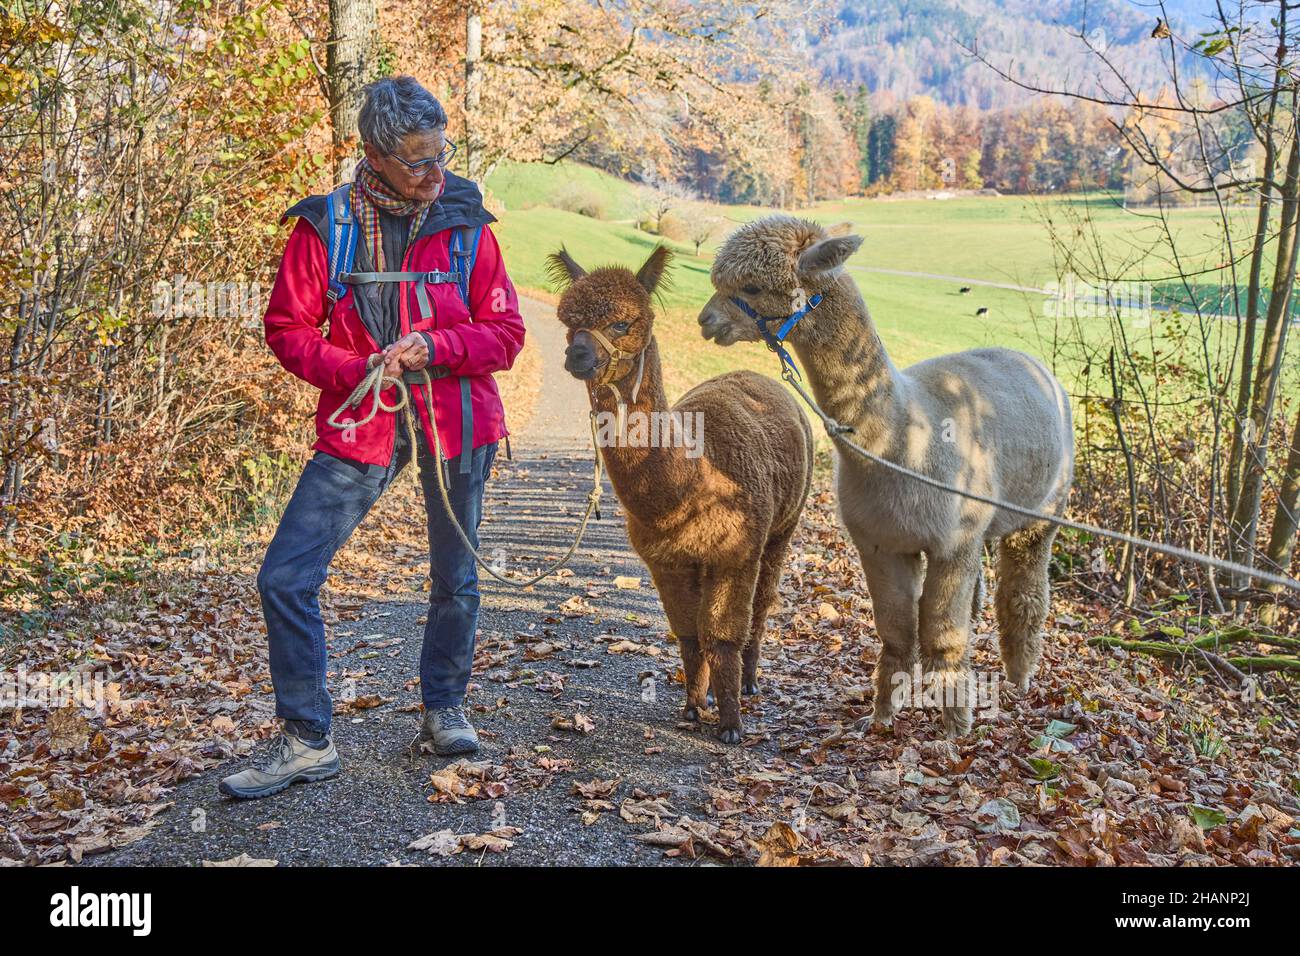 Woman In Red Jacket Leads Two Alpacas, Beige And Brown, For A Walk On Forest Path. In The Background Pasture And Forest. Bauma, Zurich Oberland, Switz Stock Photo